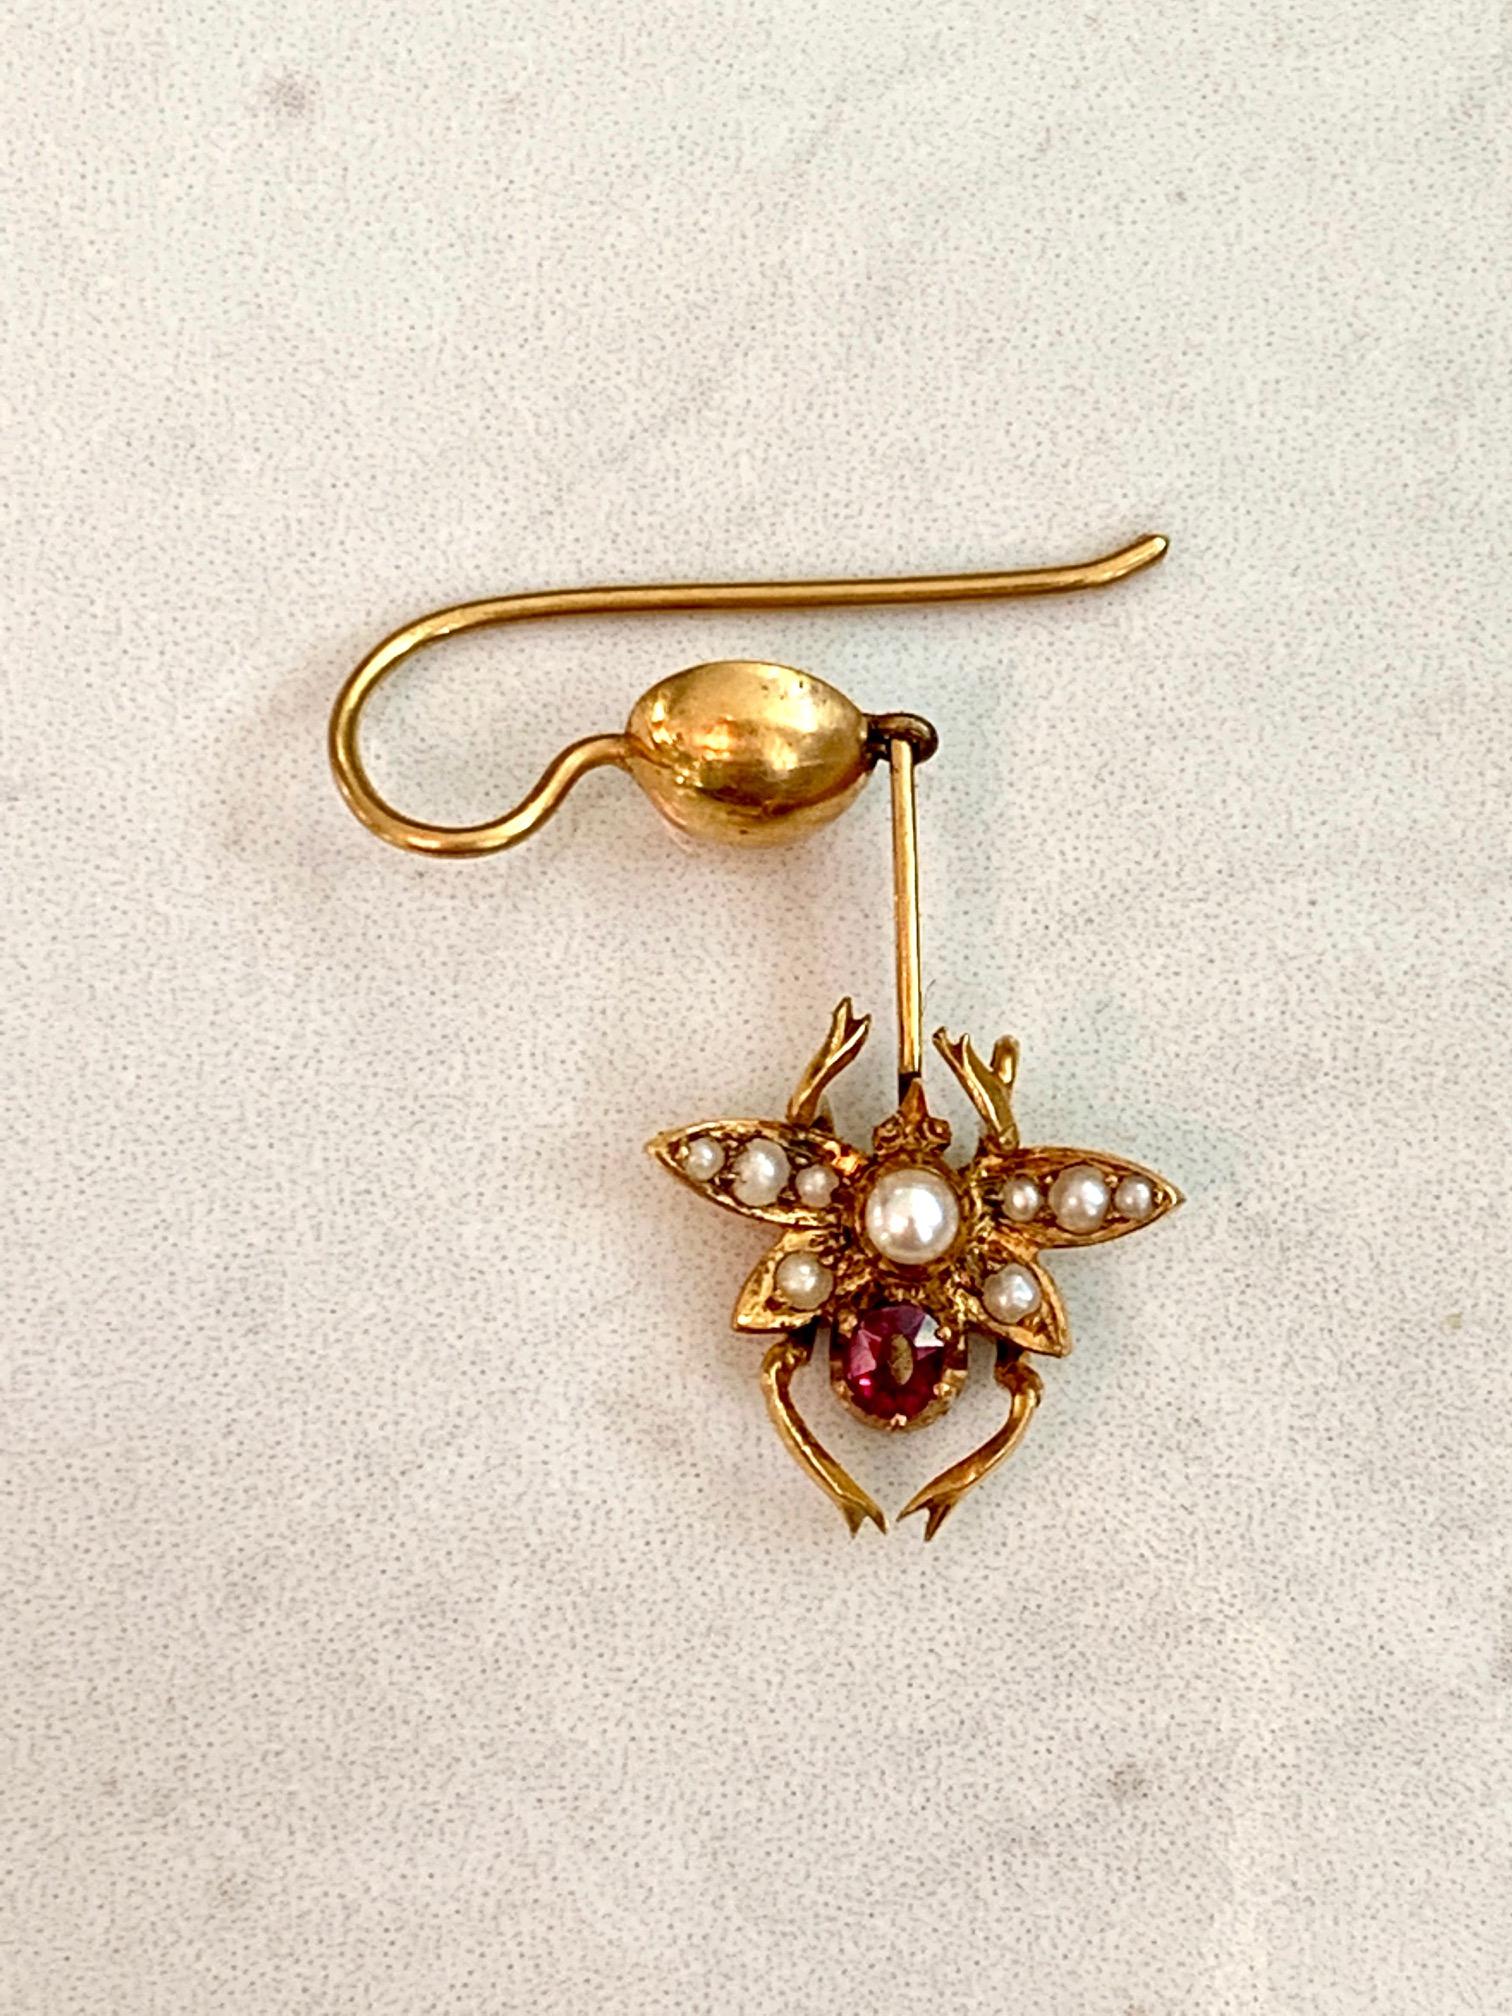 Women's Vintage Gold Insect Pin and Earring Set